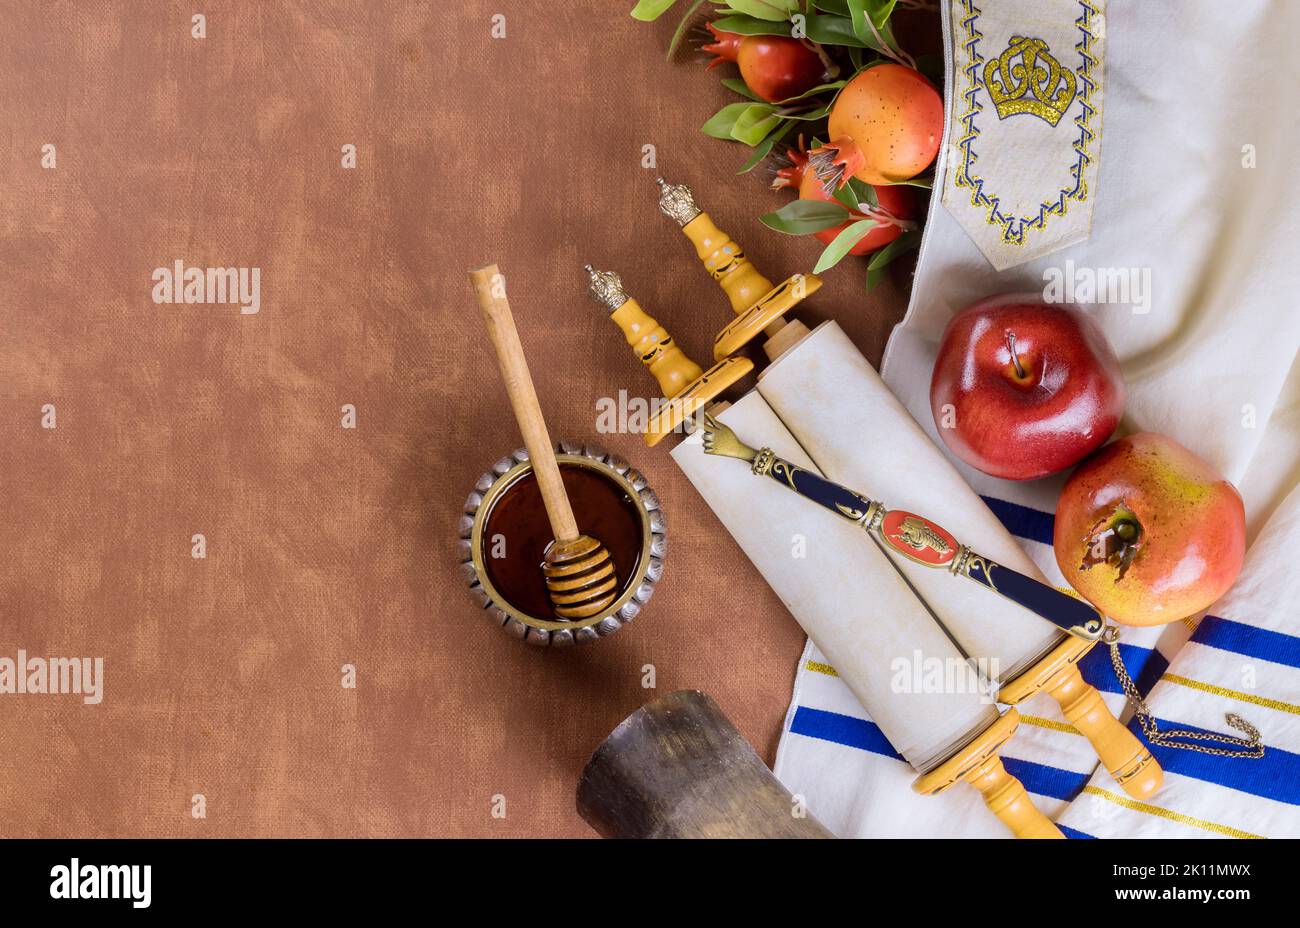 Traditionally, Apple, Honey, Pomegranate, and Shofar are some of the traditional symbols of Rosh Hashanah, the Jewish New Year holiday Stock Photo